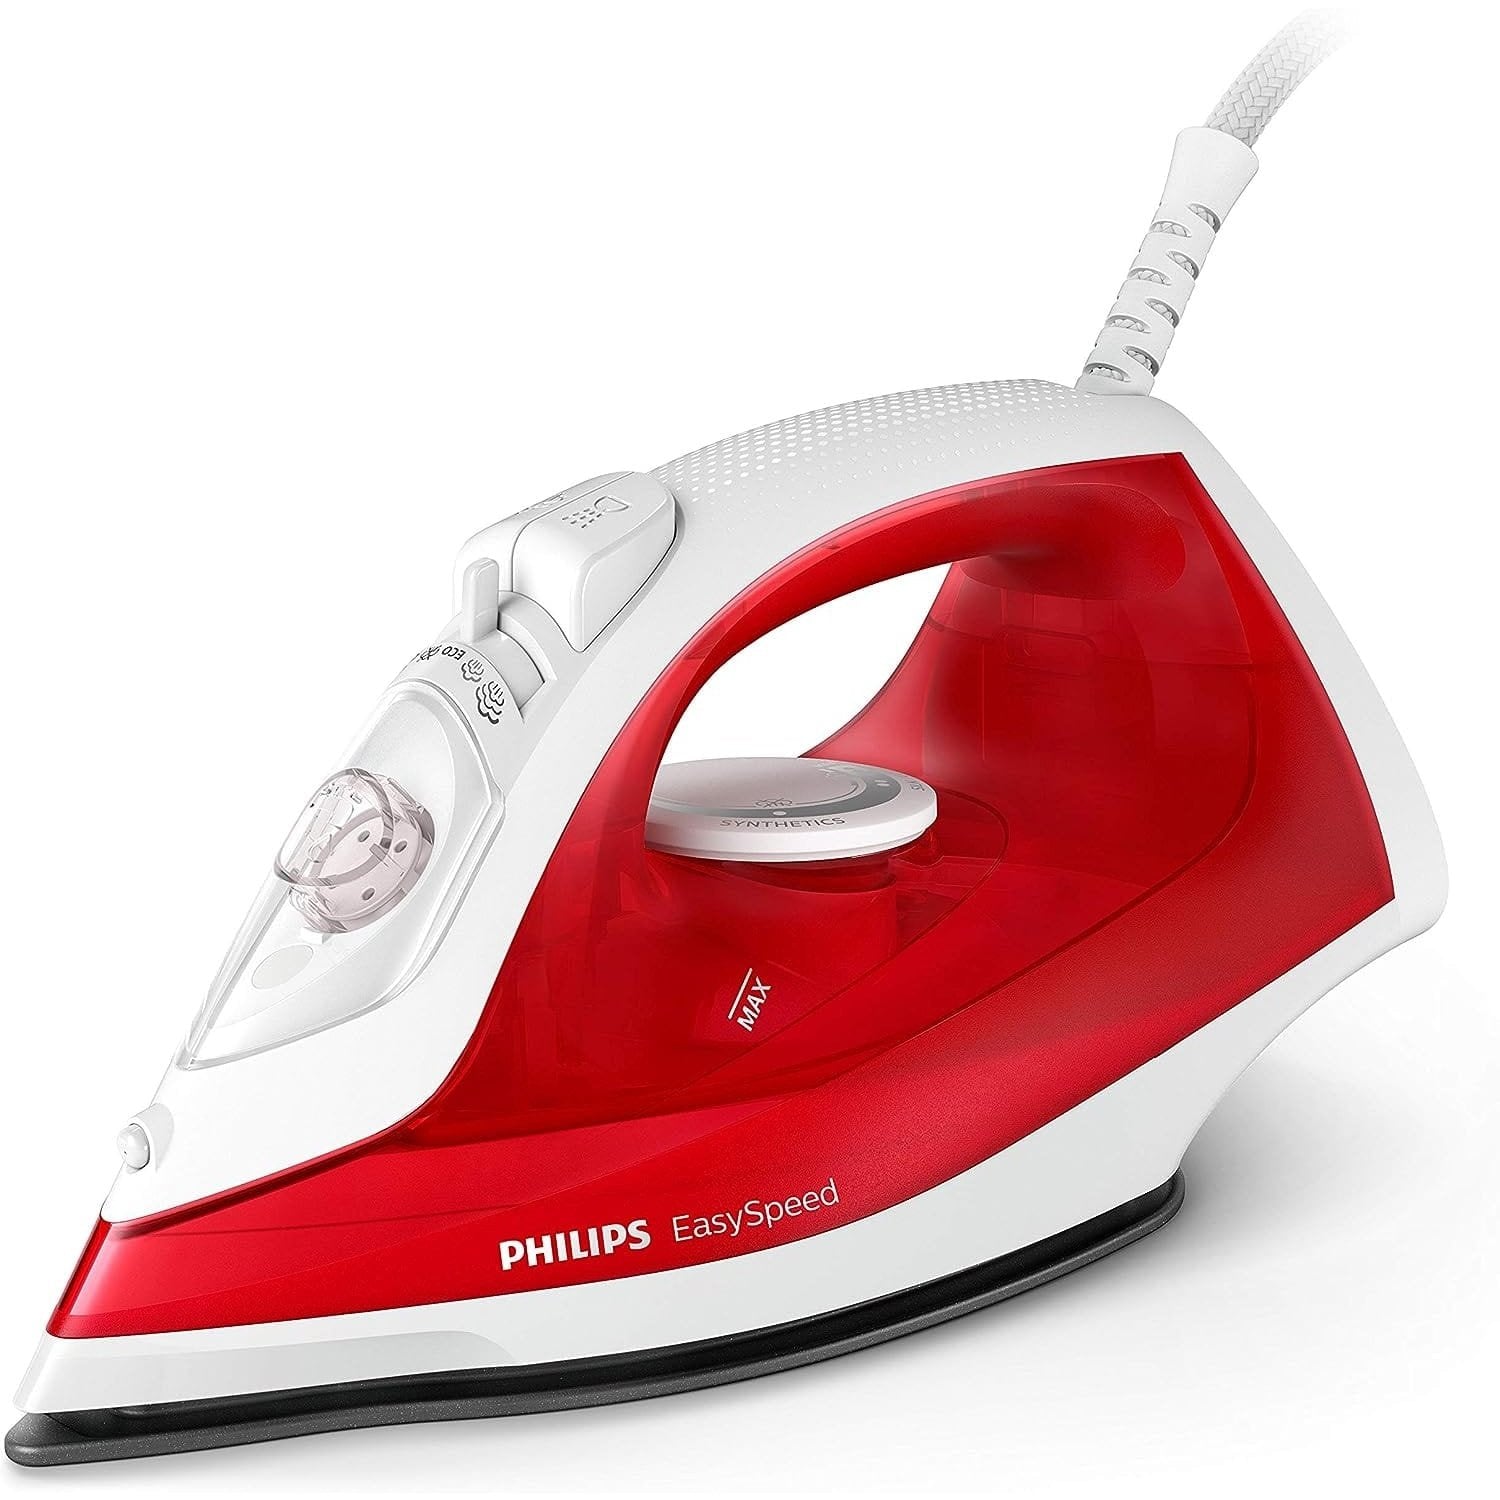 Philips Garment Steamer 1000W - STH3020 | Supply Master Accra, Ghana Electric Iron Buy Tools hardware Building materials